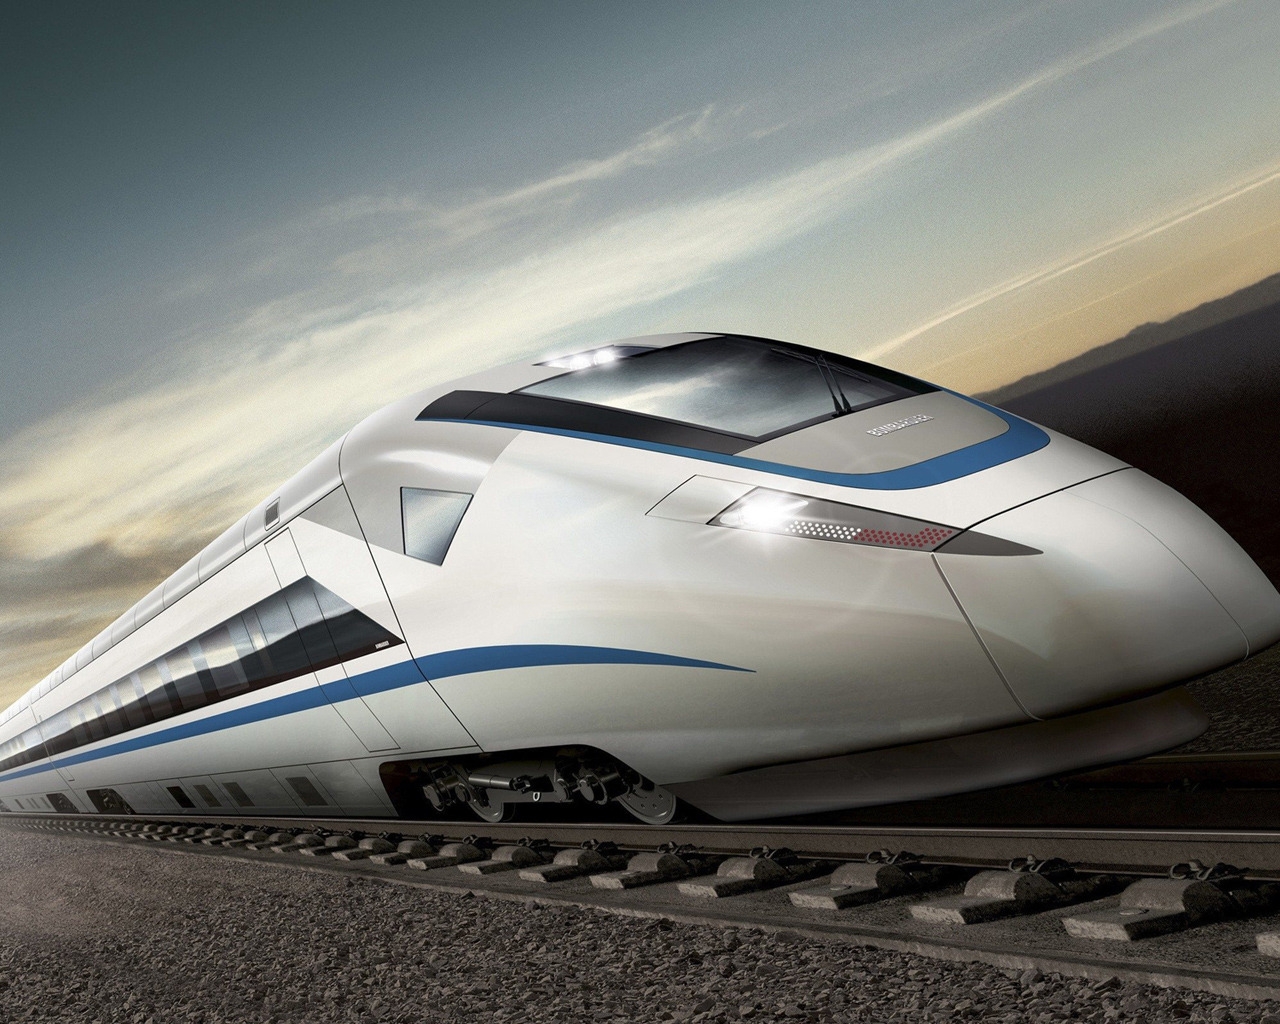 Bullet Train for 1280 x 1024 resolution